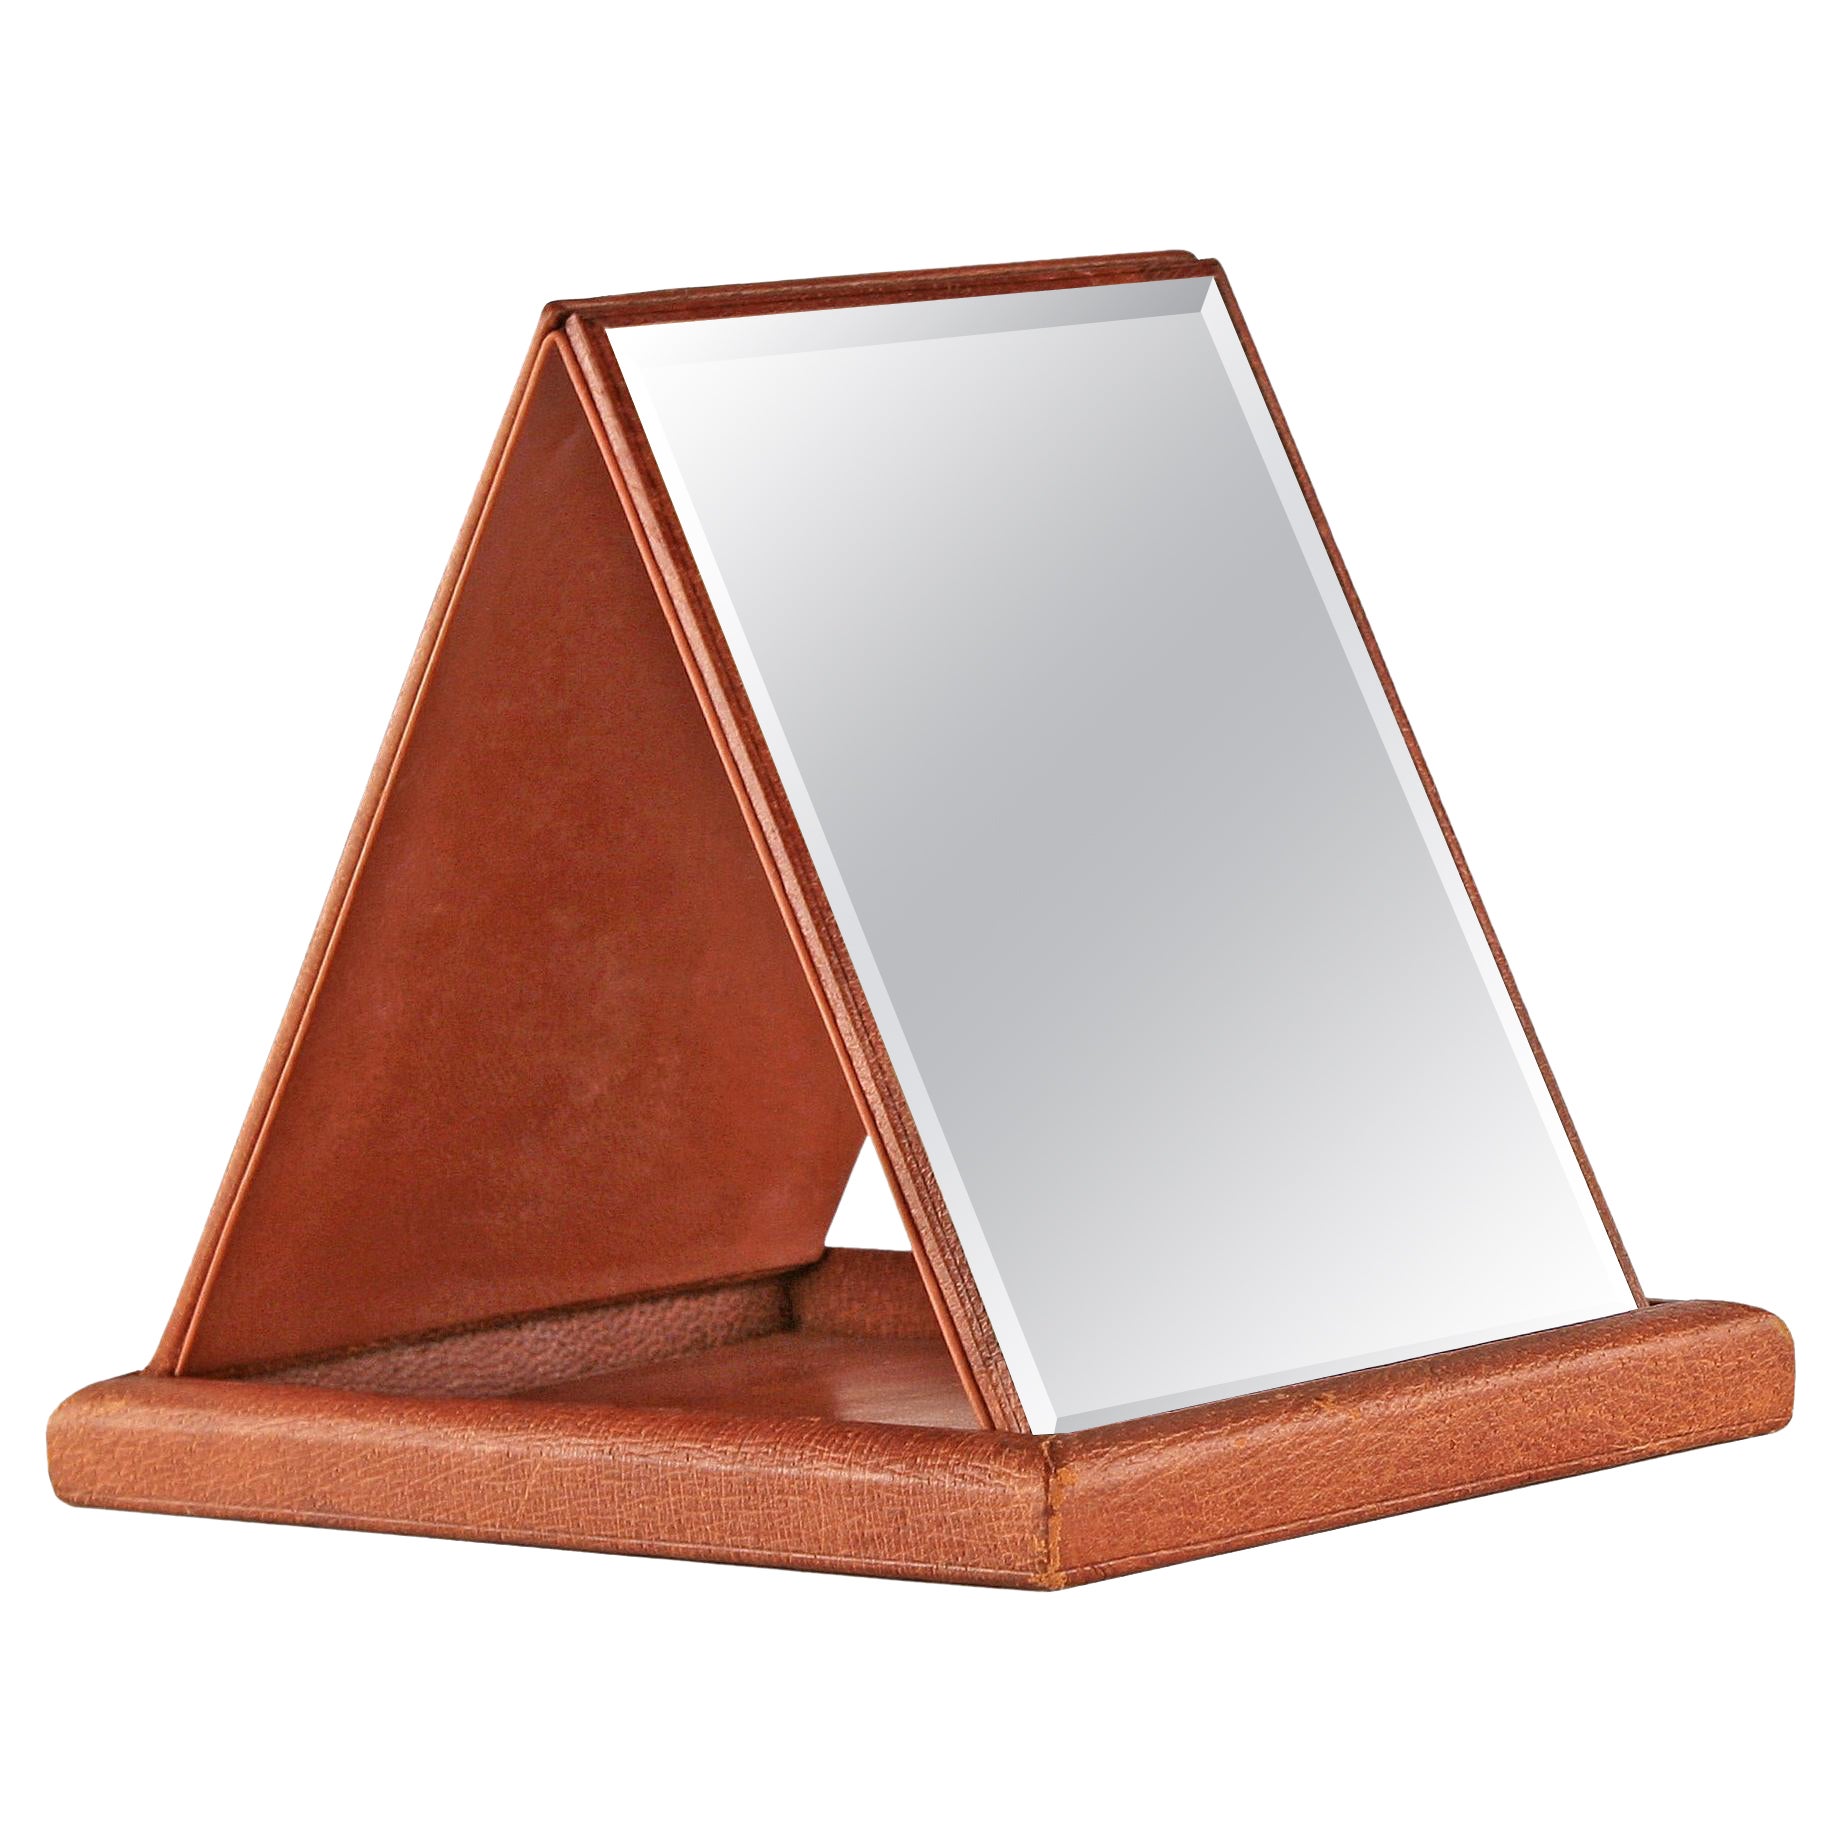 20th C. Leather and Wood Foldable Beveled Mirror by French Brand Hermès Paris